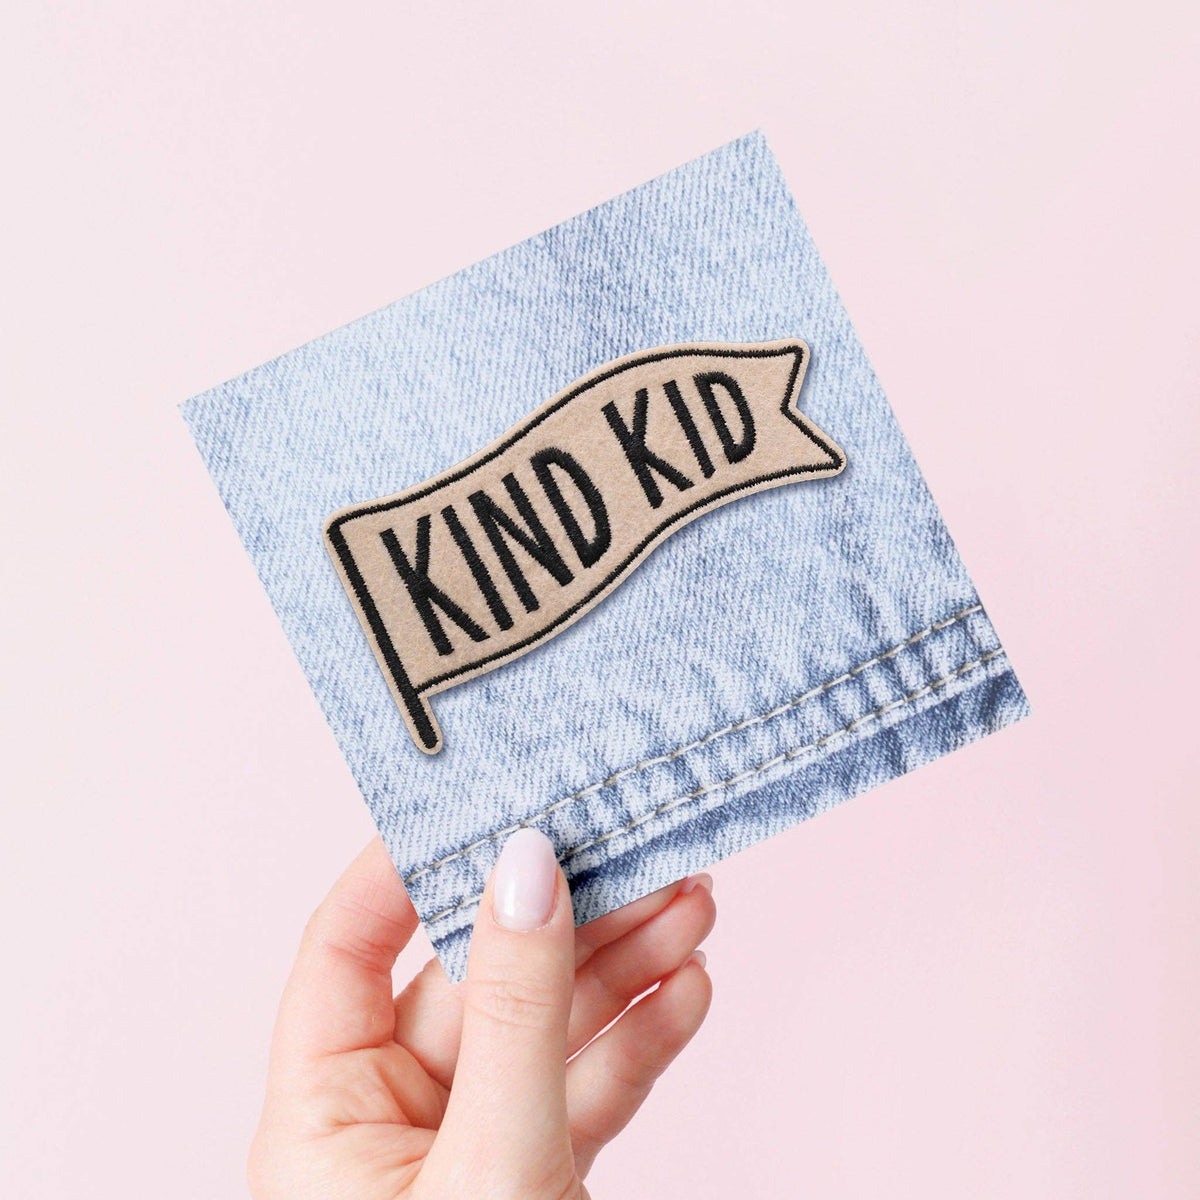 Kind Kid - Embroidered Patch